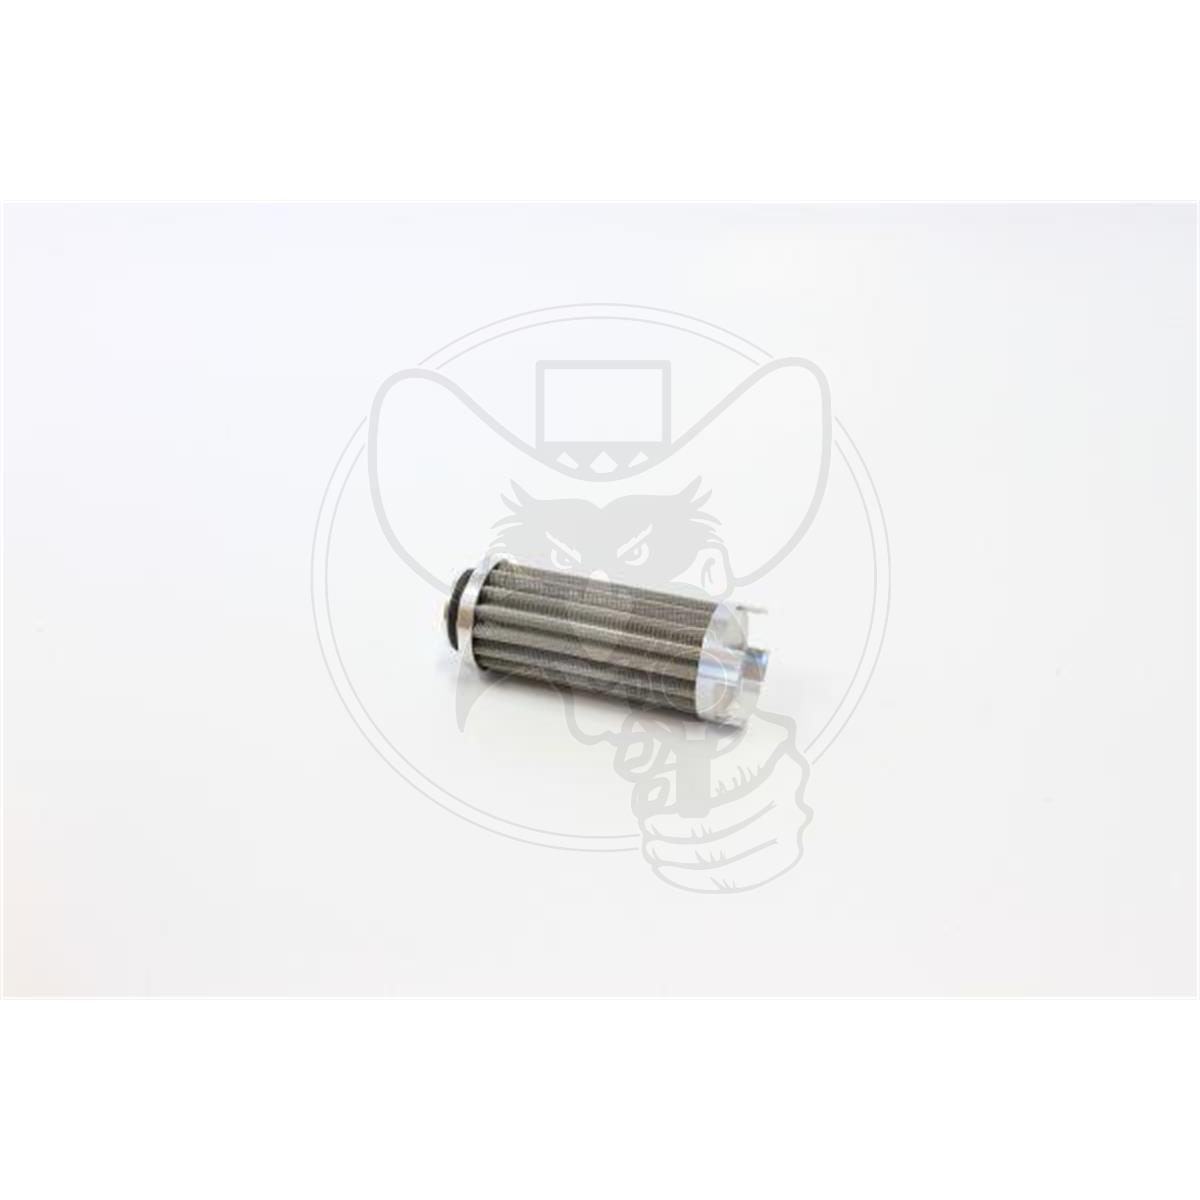 AEROFLOW 100-MICRON STAINLESS STEEL ELEMENT FITS AF66-2051